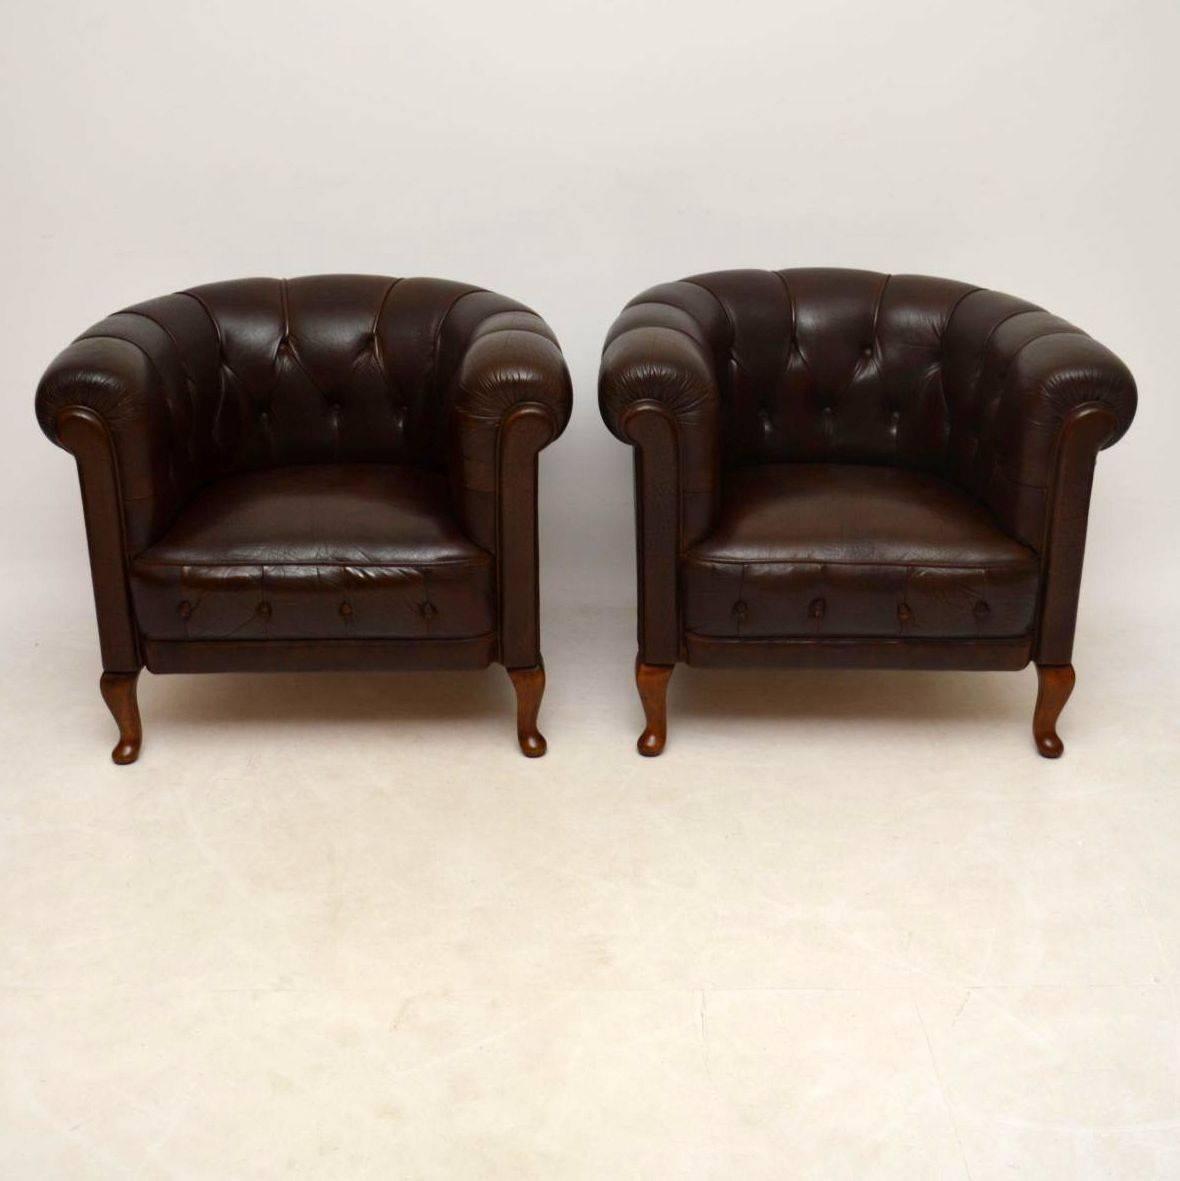 Very comfortable pair of antique Swedish leather armchairs dating to circa 1890-1910 period. They have curved deep buttoned backs and more buttoning below the seats. The leather is in great condition and the color is good. These chairs are